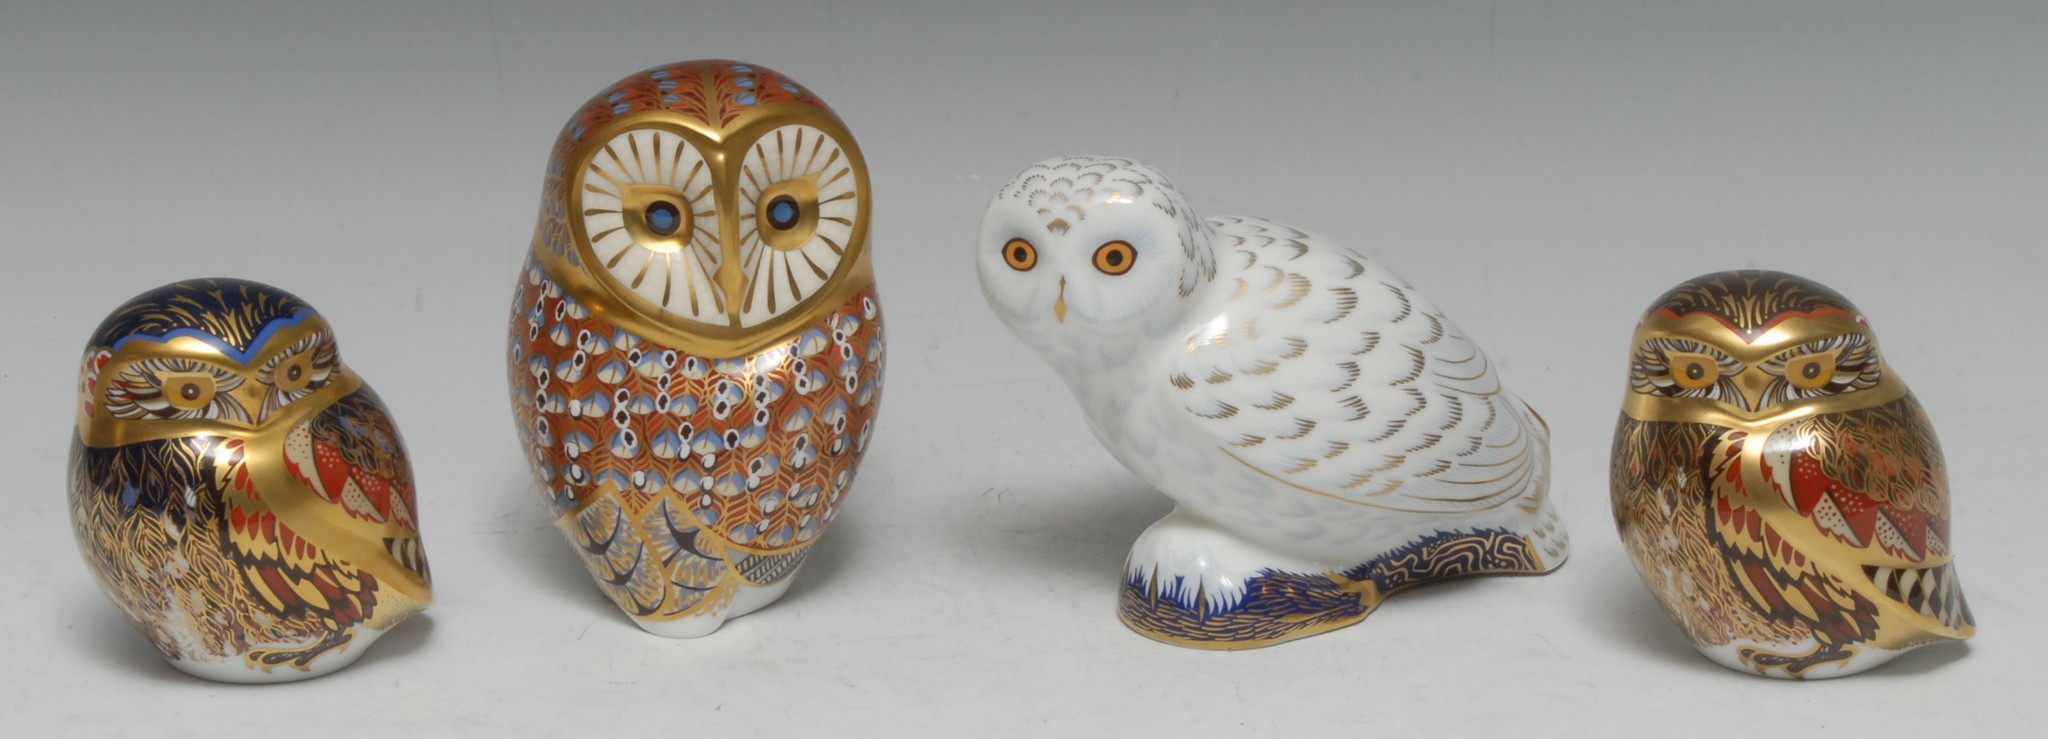 A Royal Crown Derby paperweight, Athena Florence Nightingale's Little Owl, limited edition, 248/750,